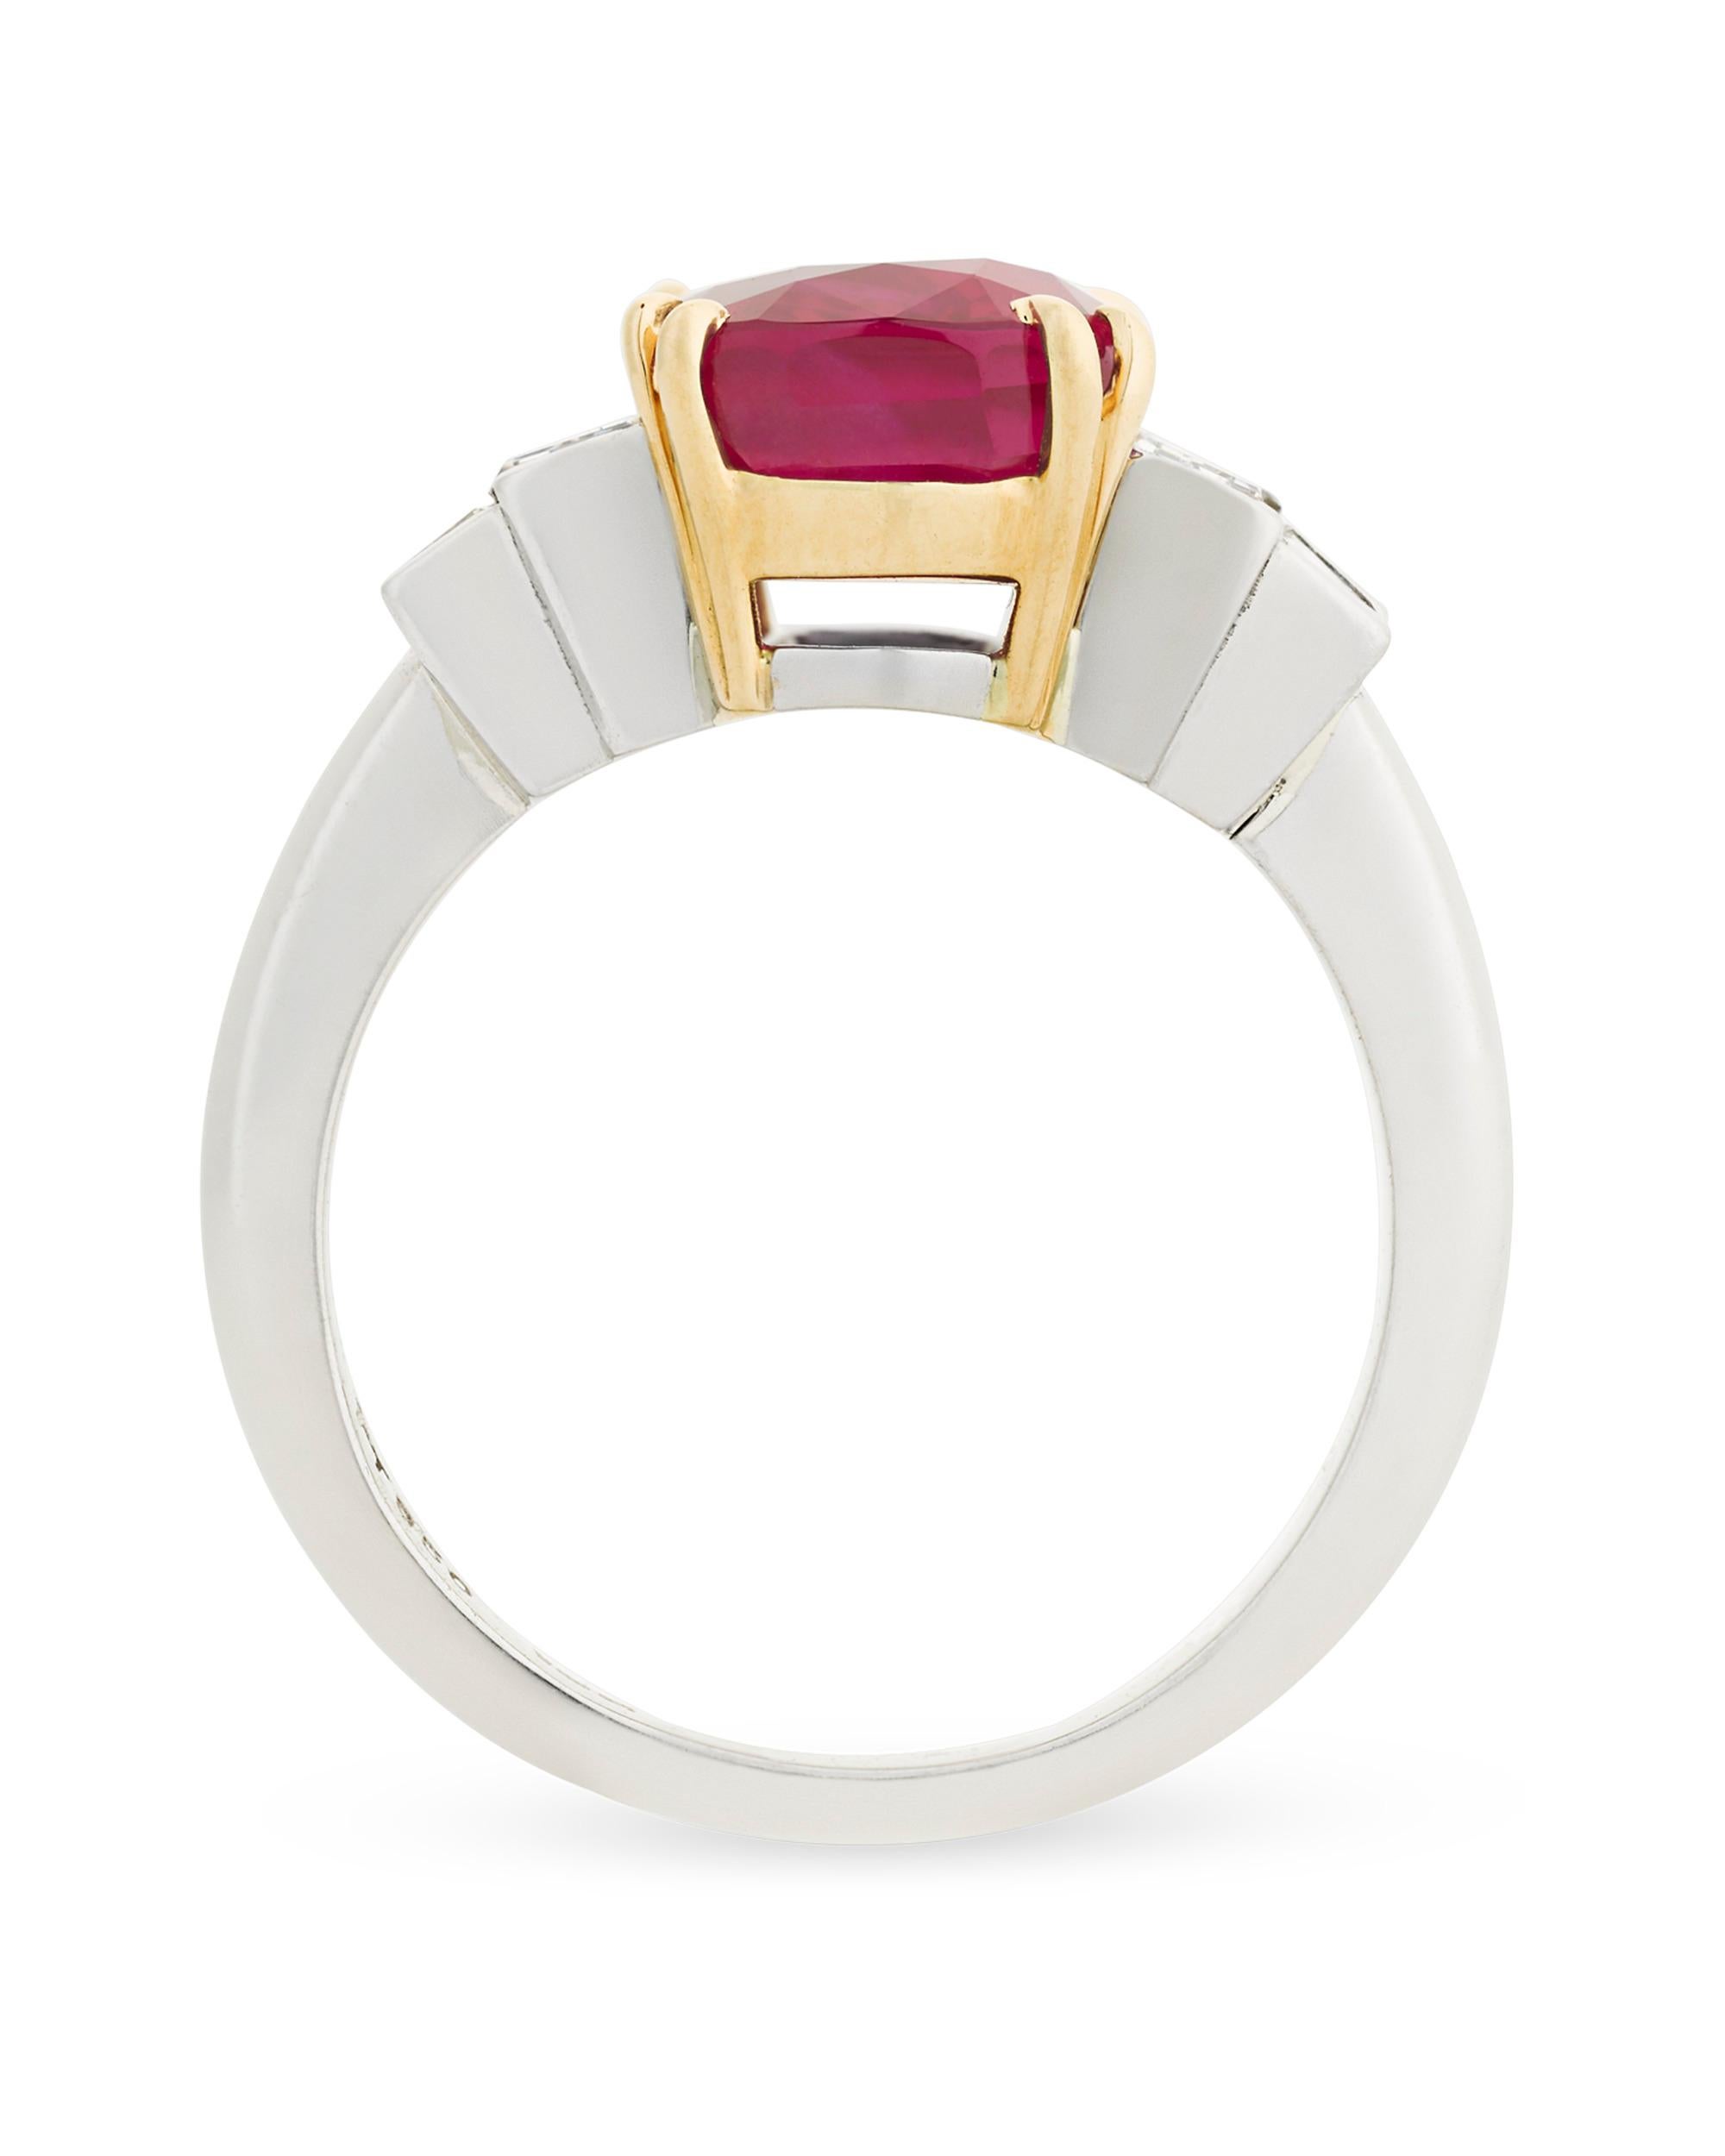 Rubies hailing from Burma are among the most coveted gemstones of their kind, and this exceptional 4.02-carat example exemplifies the rare beauty of the stone. Expertly set by the legendary American jewelers Tiffany & Co., the Burma ruby displays a